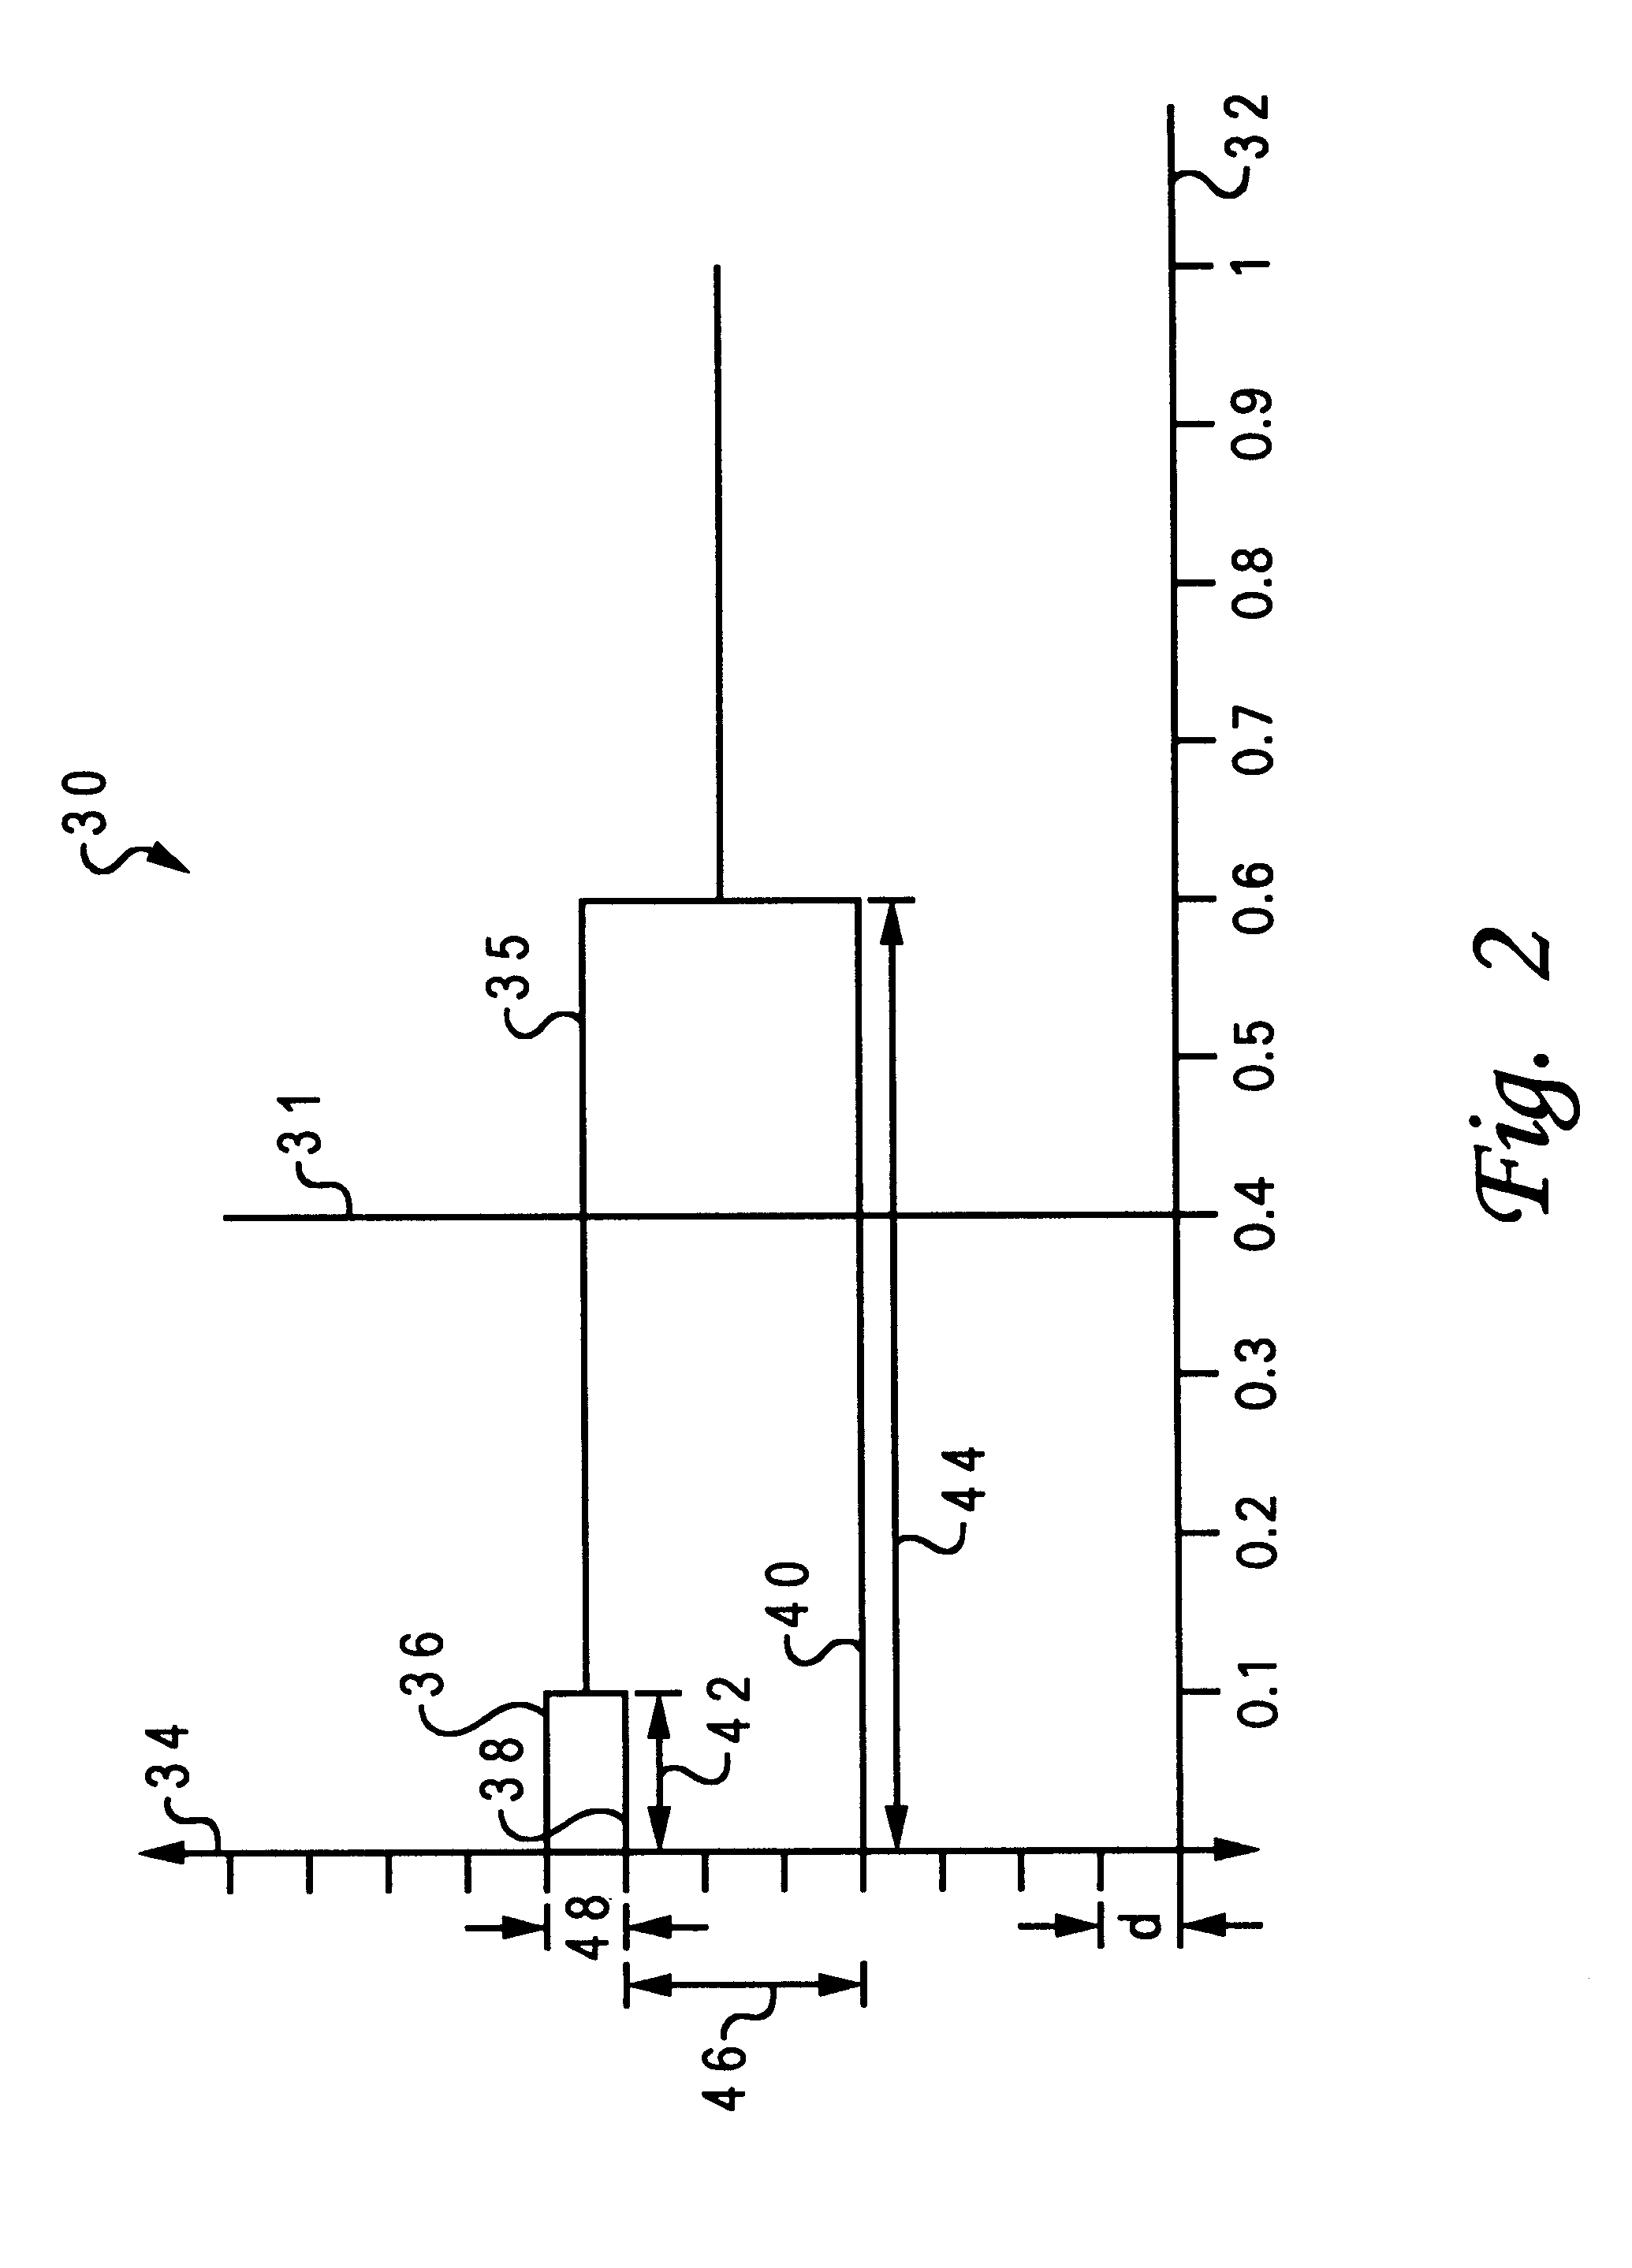 Method and system for dynamically representing cluster analysis results